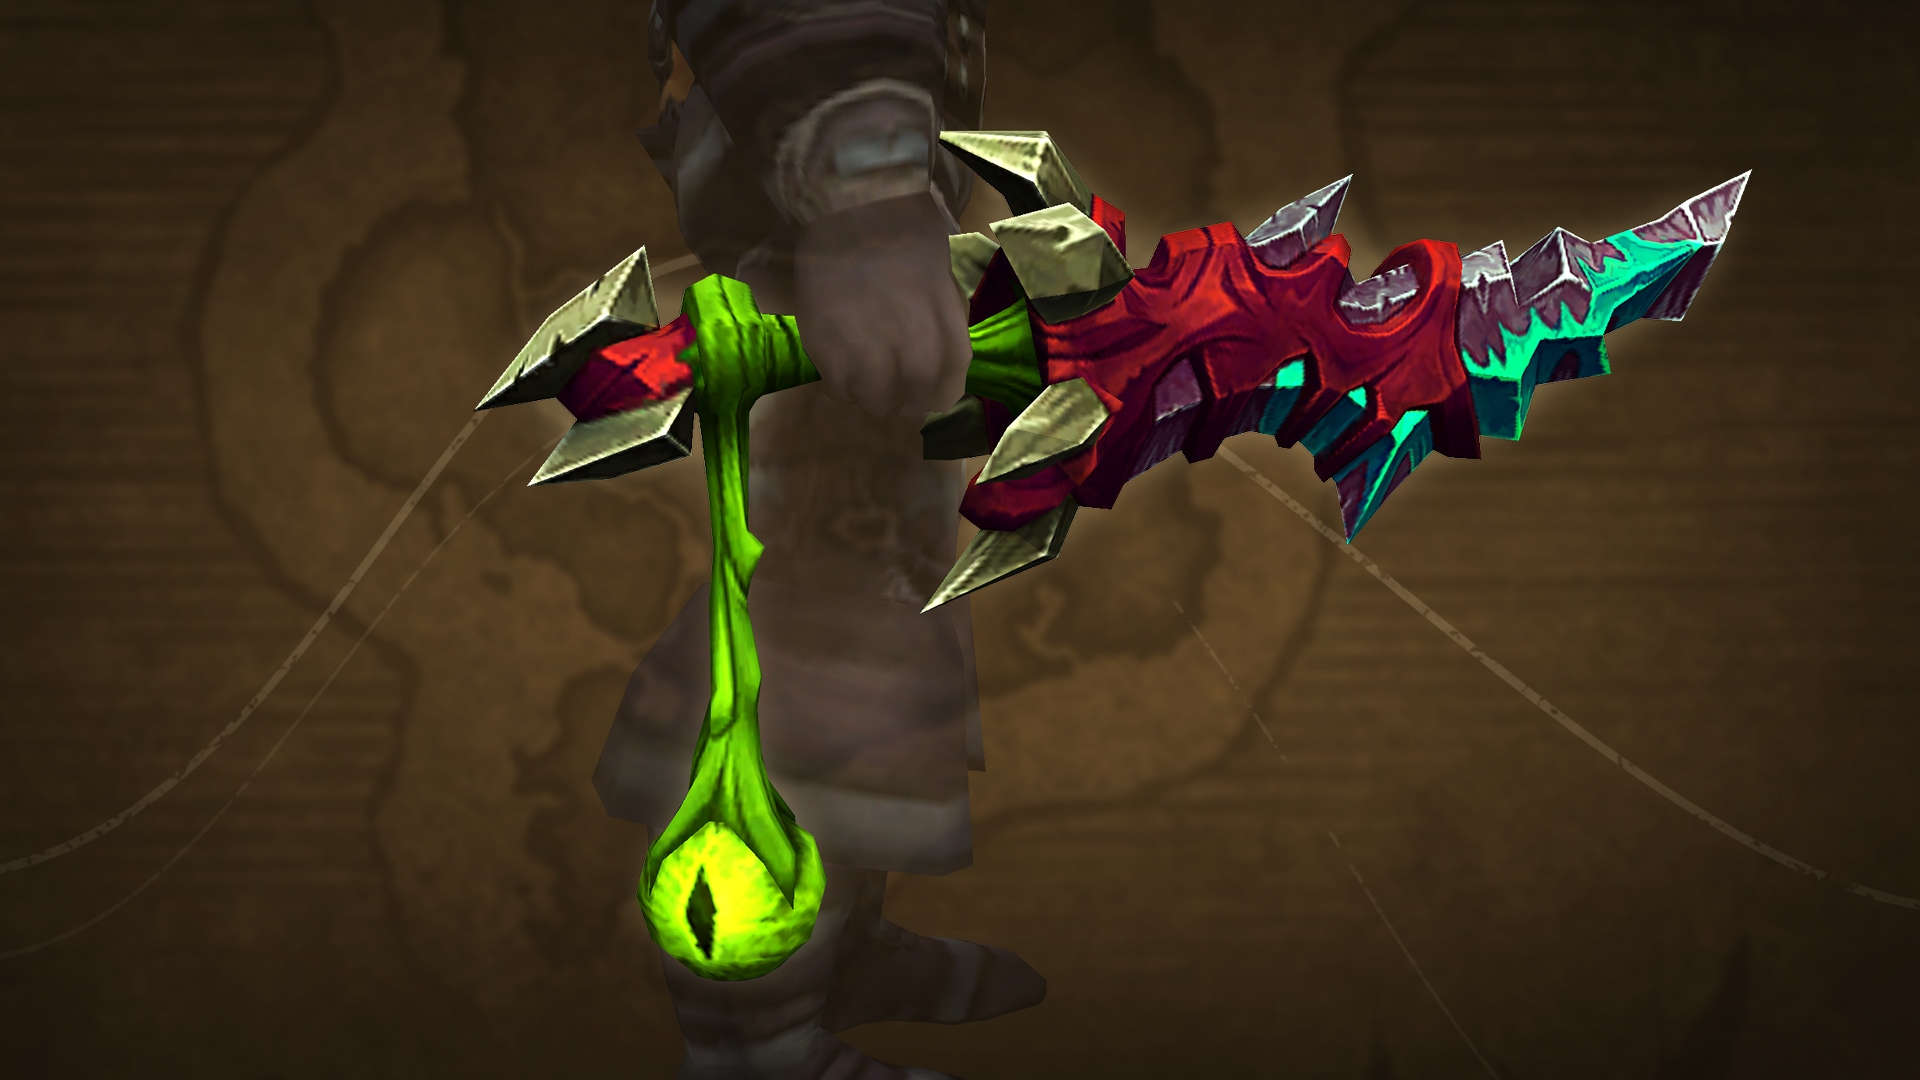 red jagged tooth dagger with blue at the tip and fel green wrap hilt with a green eye hanging down